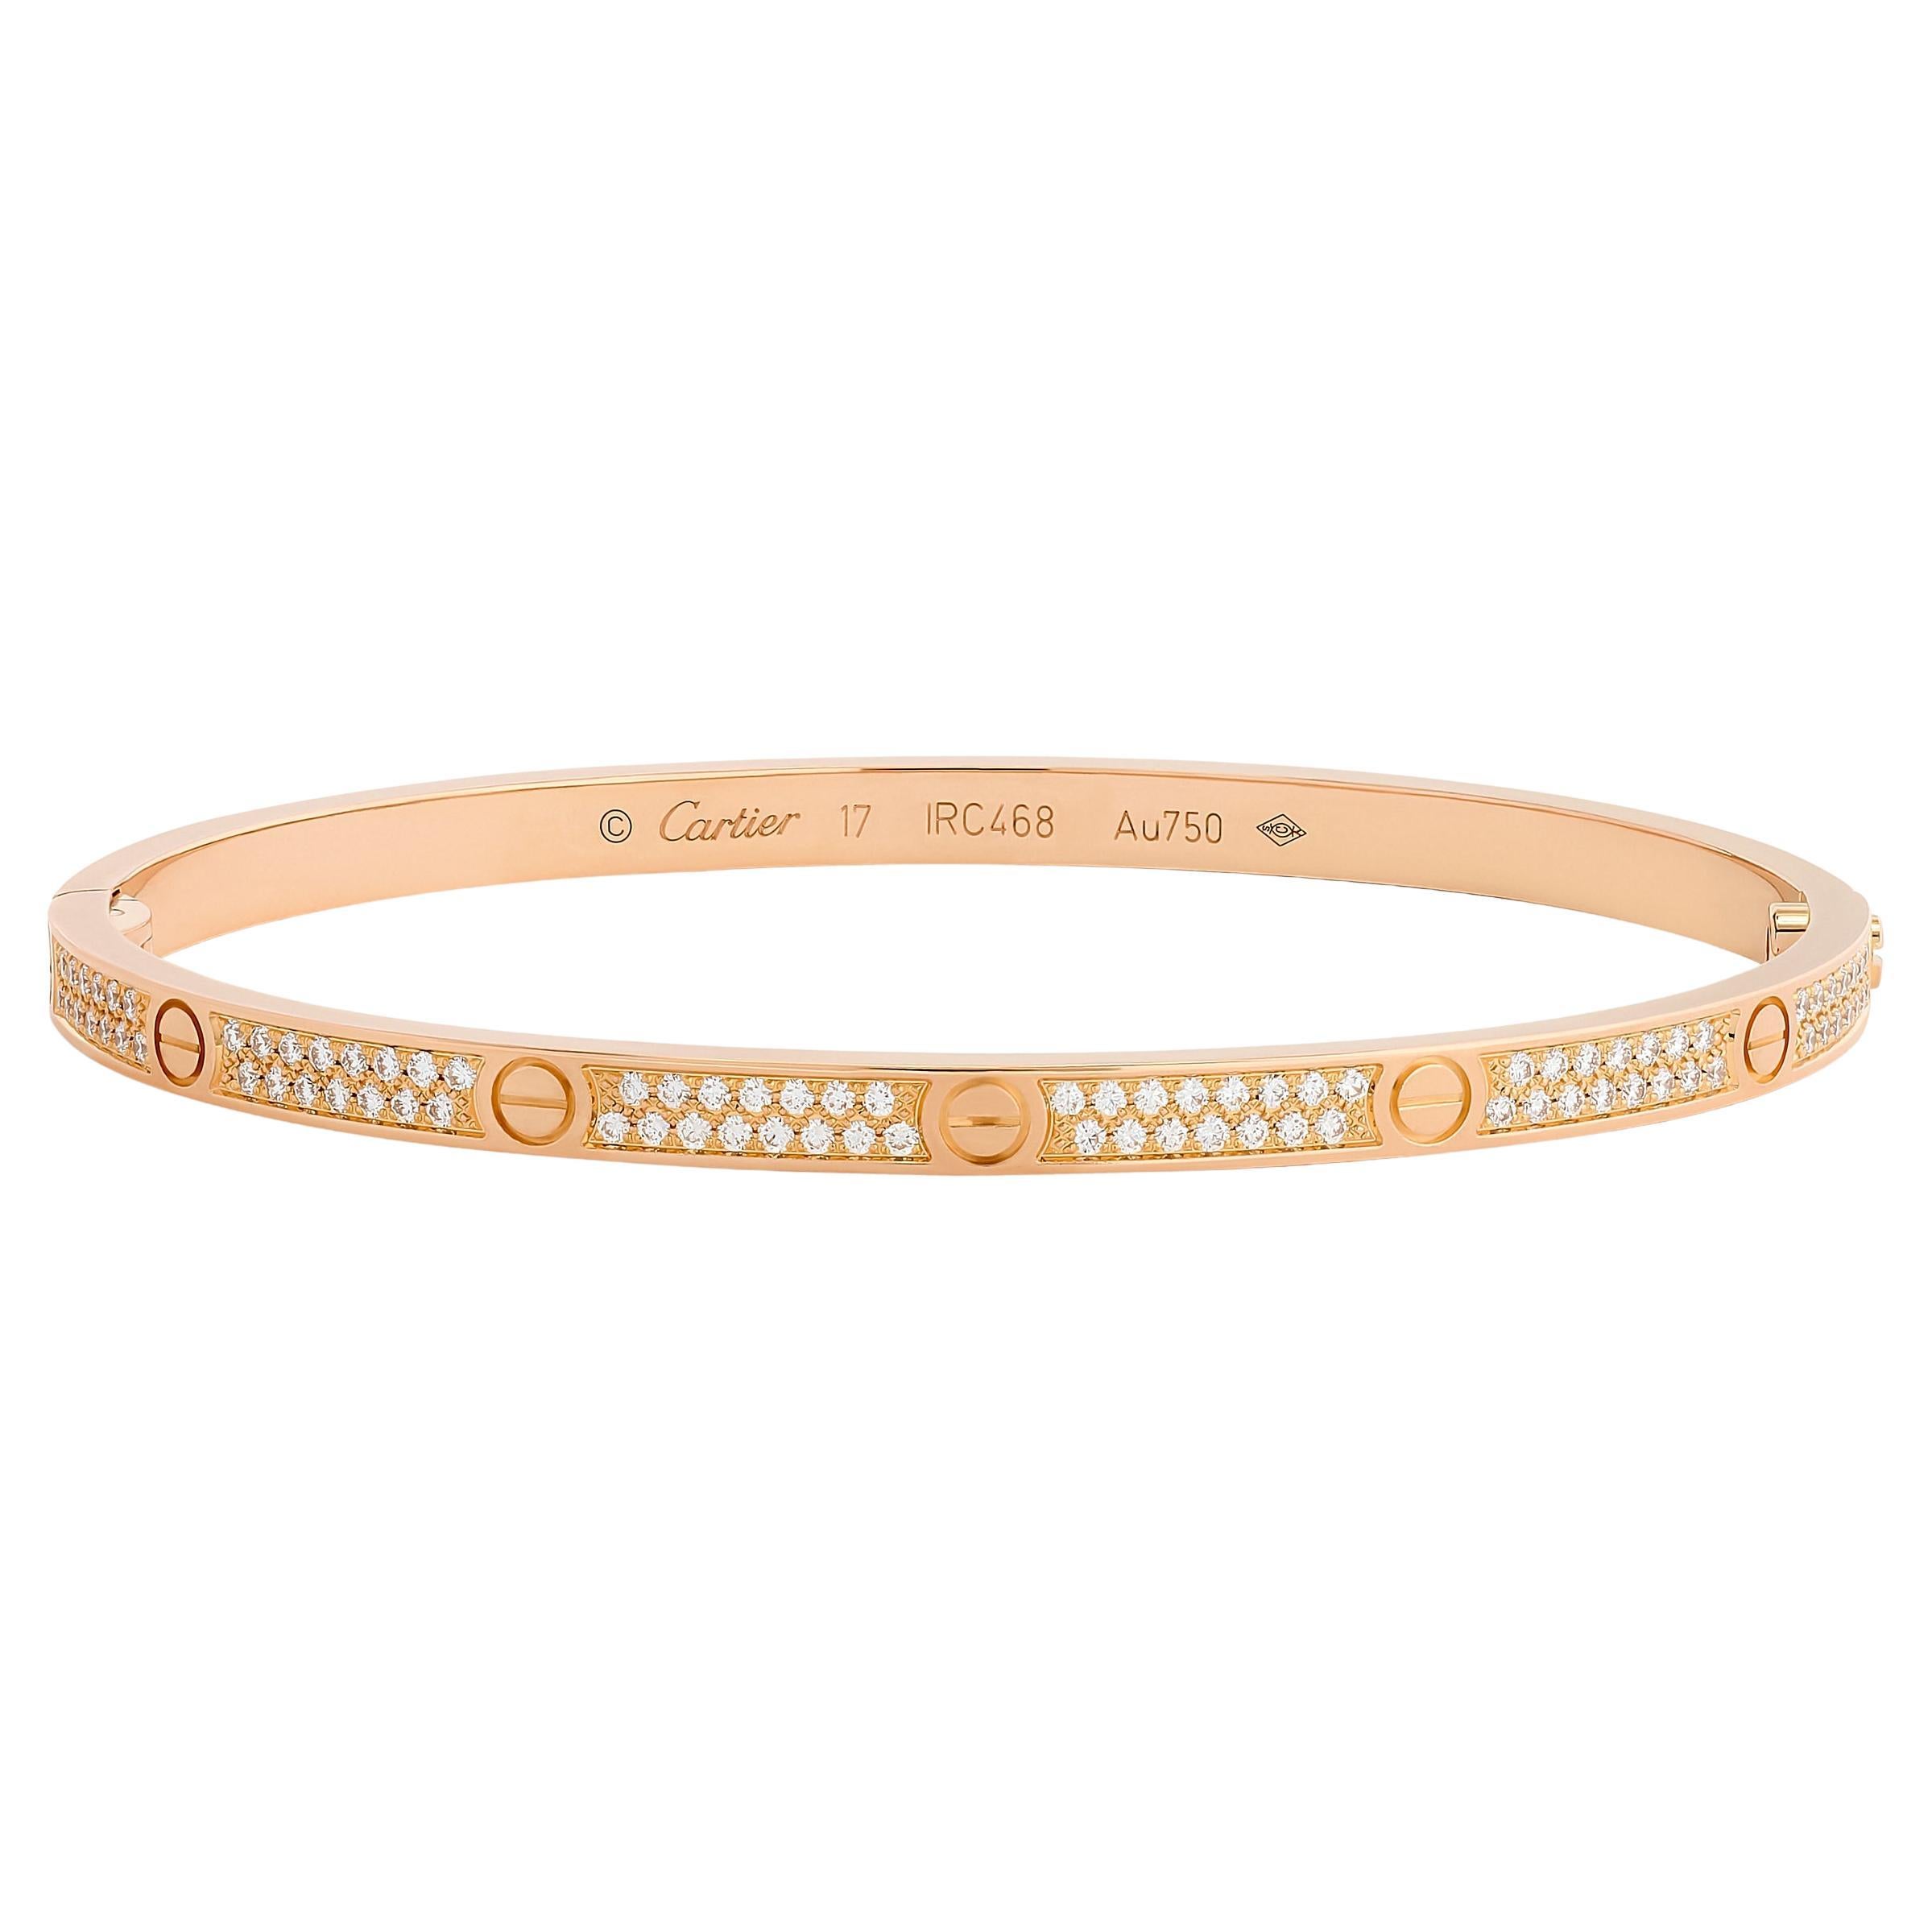 Cartier Pave Diamond Love Bracelet in 18k Rose Gold with Box & Screwdriver For Sale